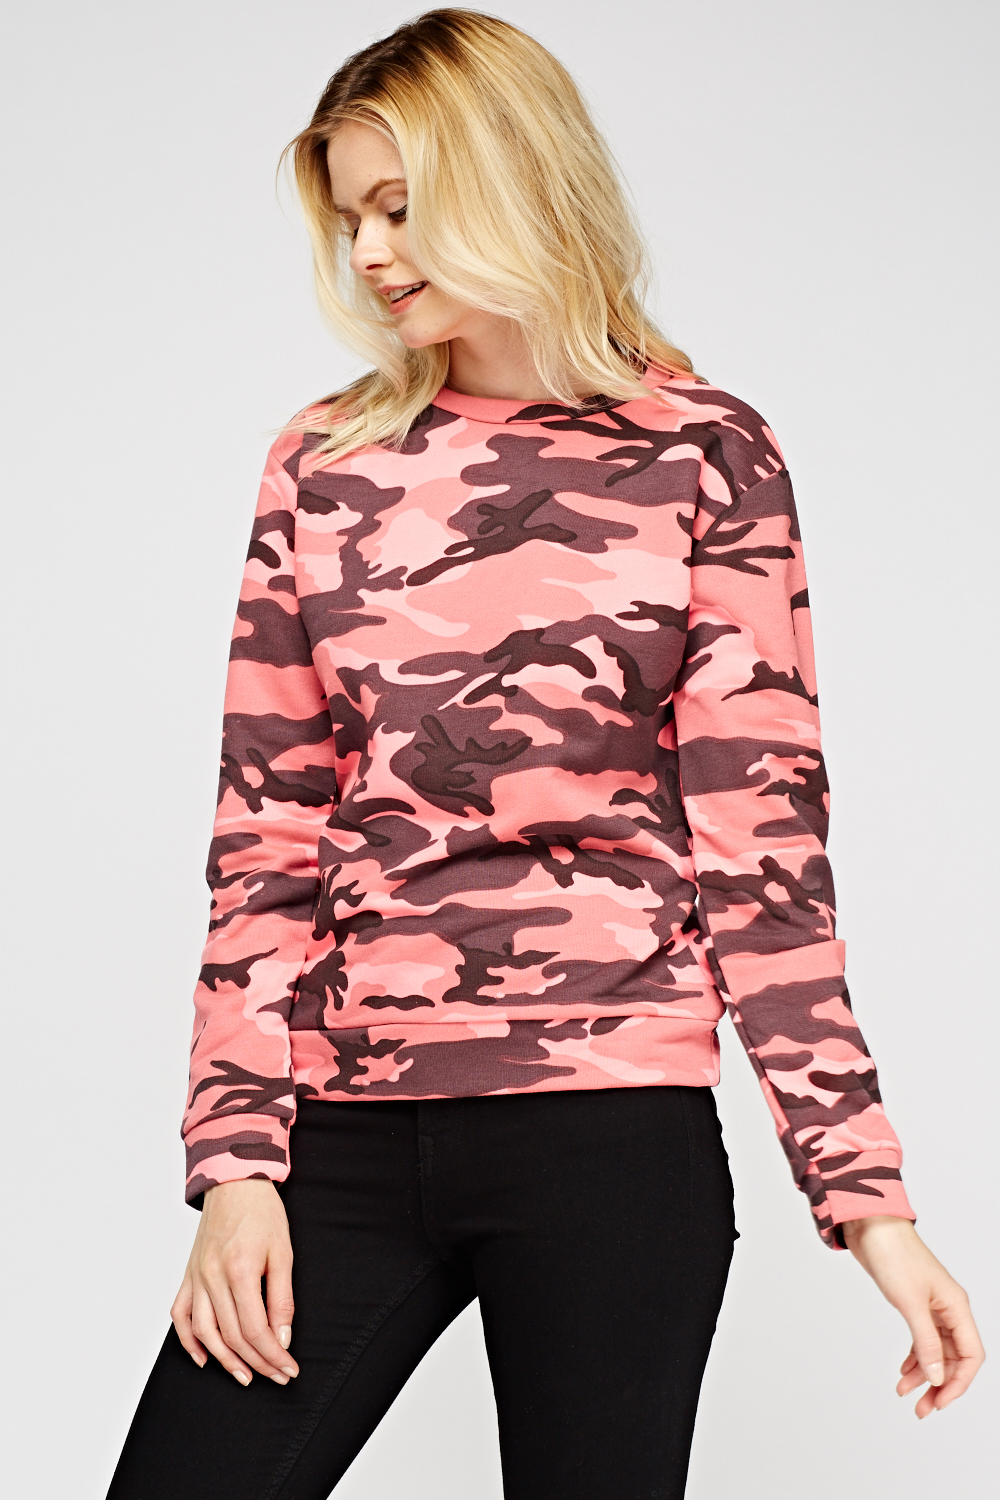 Hot Pink Camouflage Jumper - Just $6